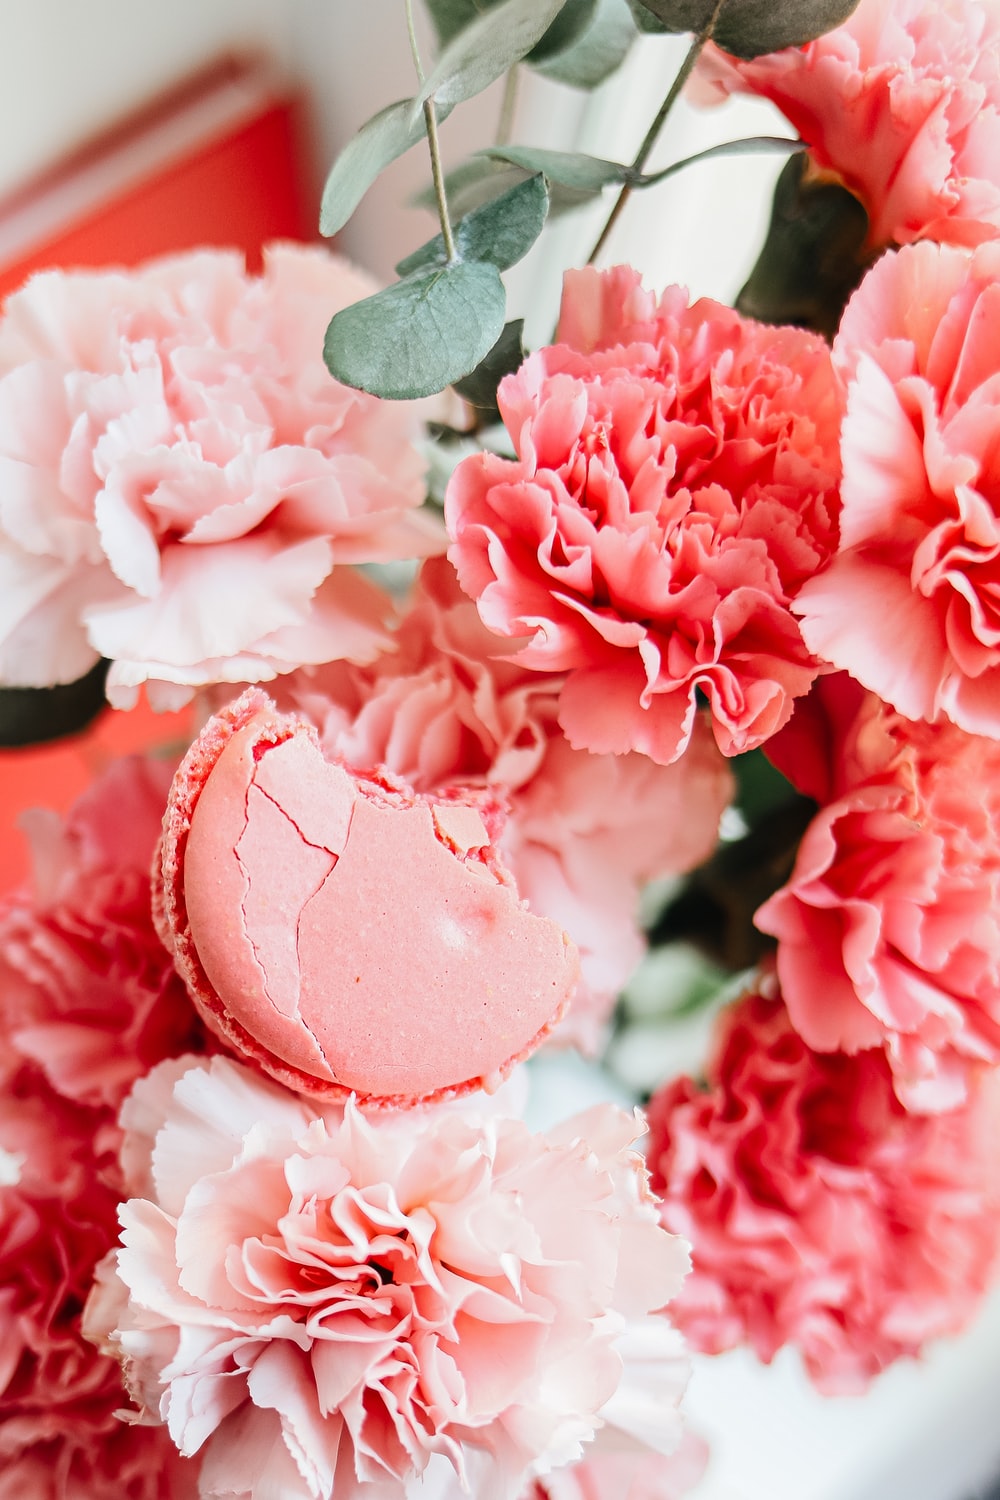 Pink Carnation Pictures Image